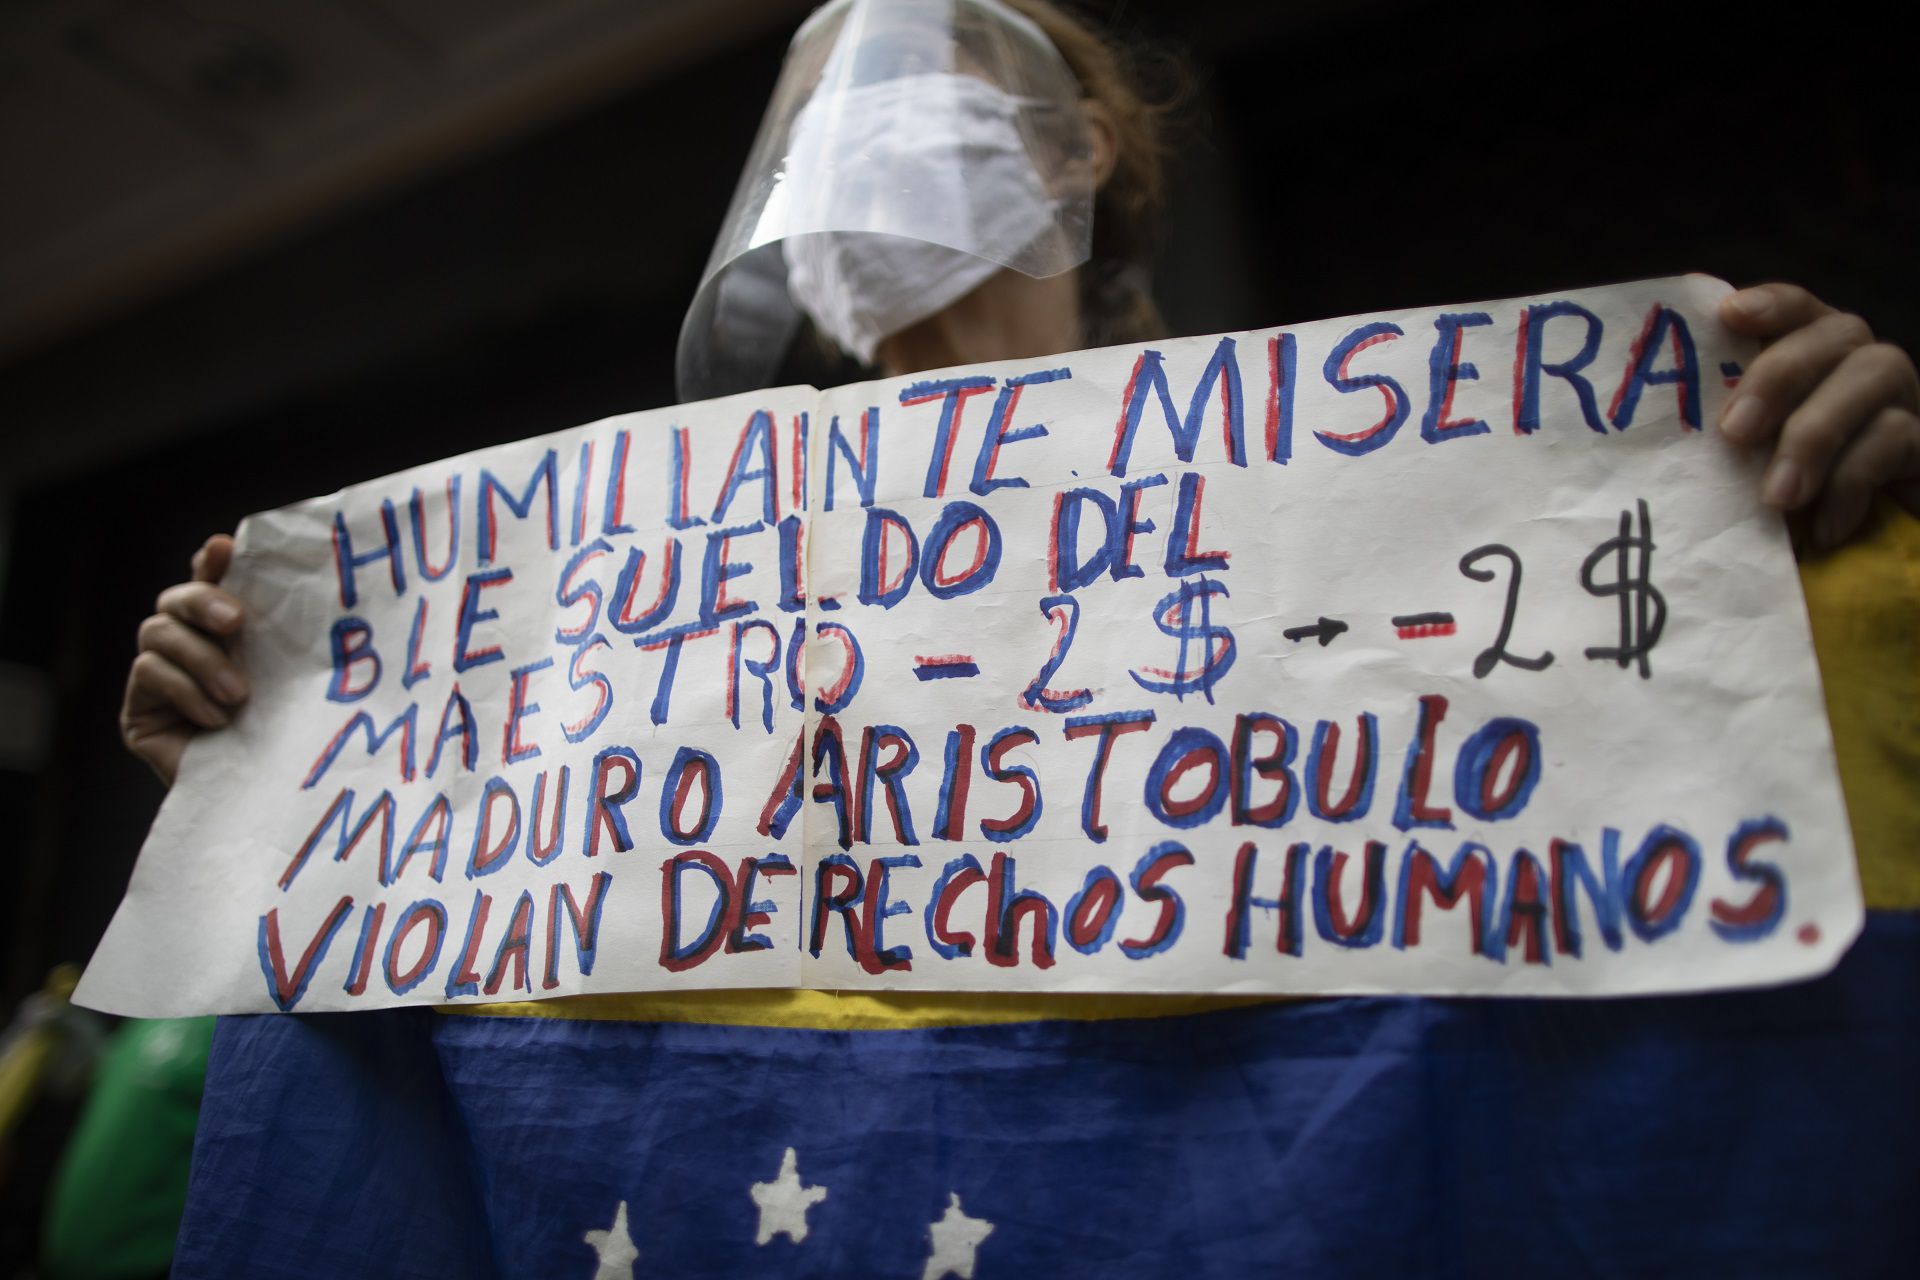 A protester holds the Spanish message: "Humiliating and miserable teachers salaries. $2 dollars," during a demonstration for higher pay in Caracas, Venezuela, Wednesday, Oct. 21, 2020. Some health workers also joined the protest and complained about their salaries of about $4 dollars a month, amid the COVID-19 pandemic. (AP Photo/Ariana Cubillos)